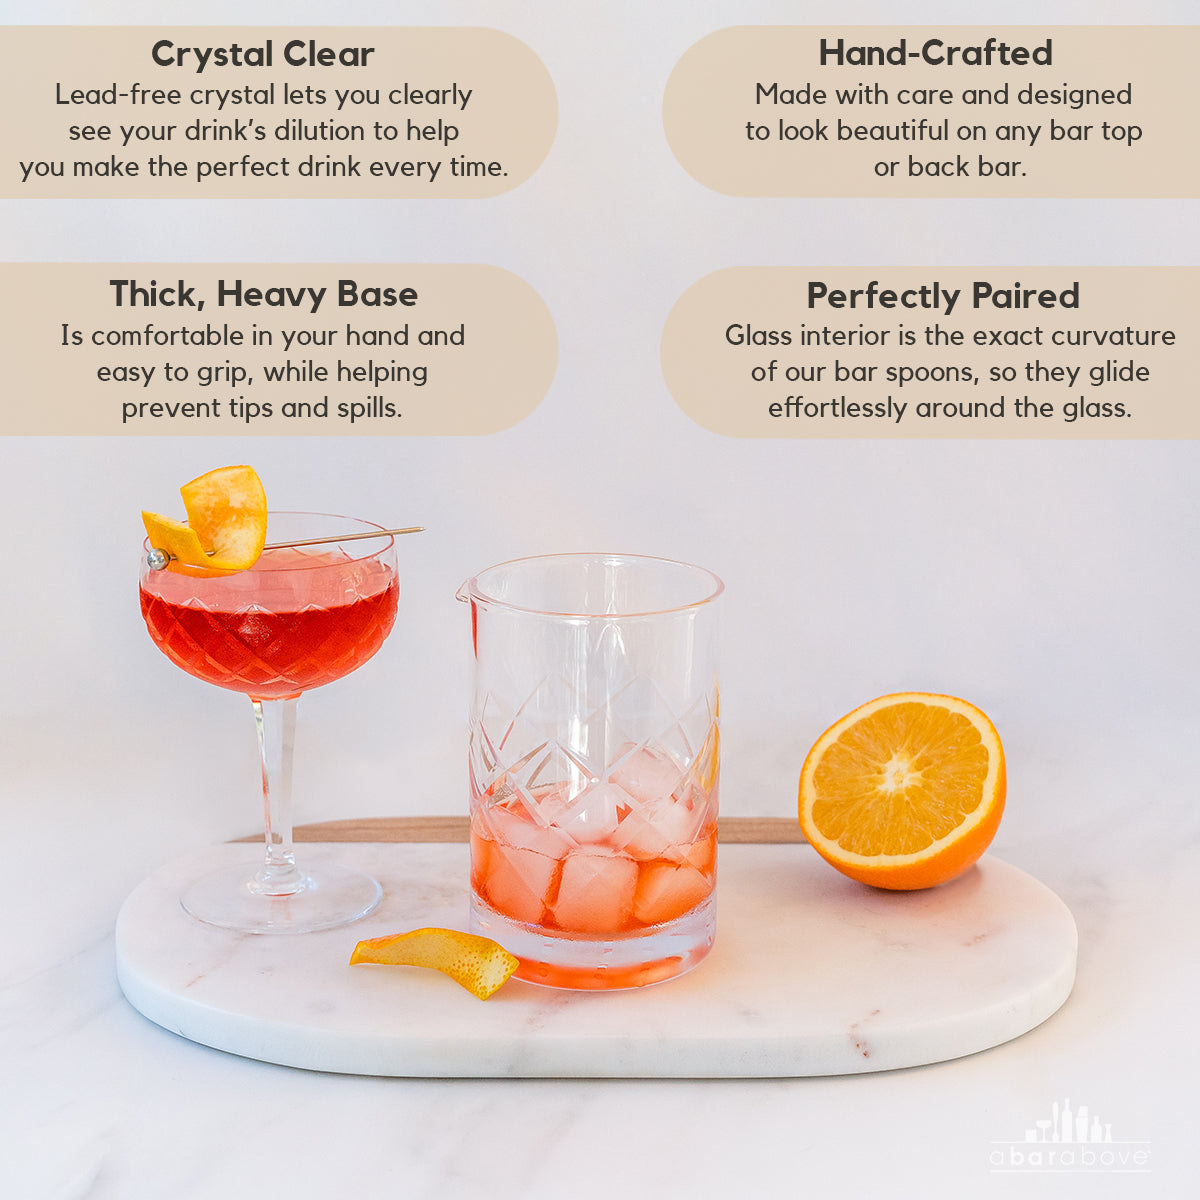 Mixopedia: The Complicated Appeal of the Rimmed Cocktail Glass